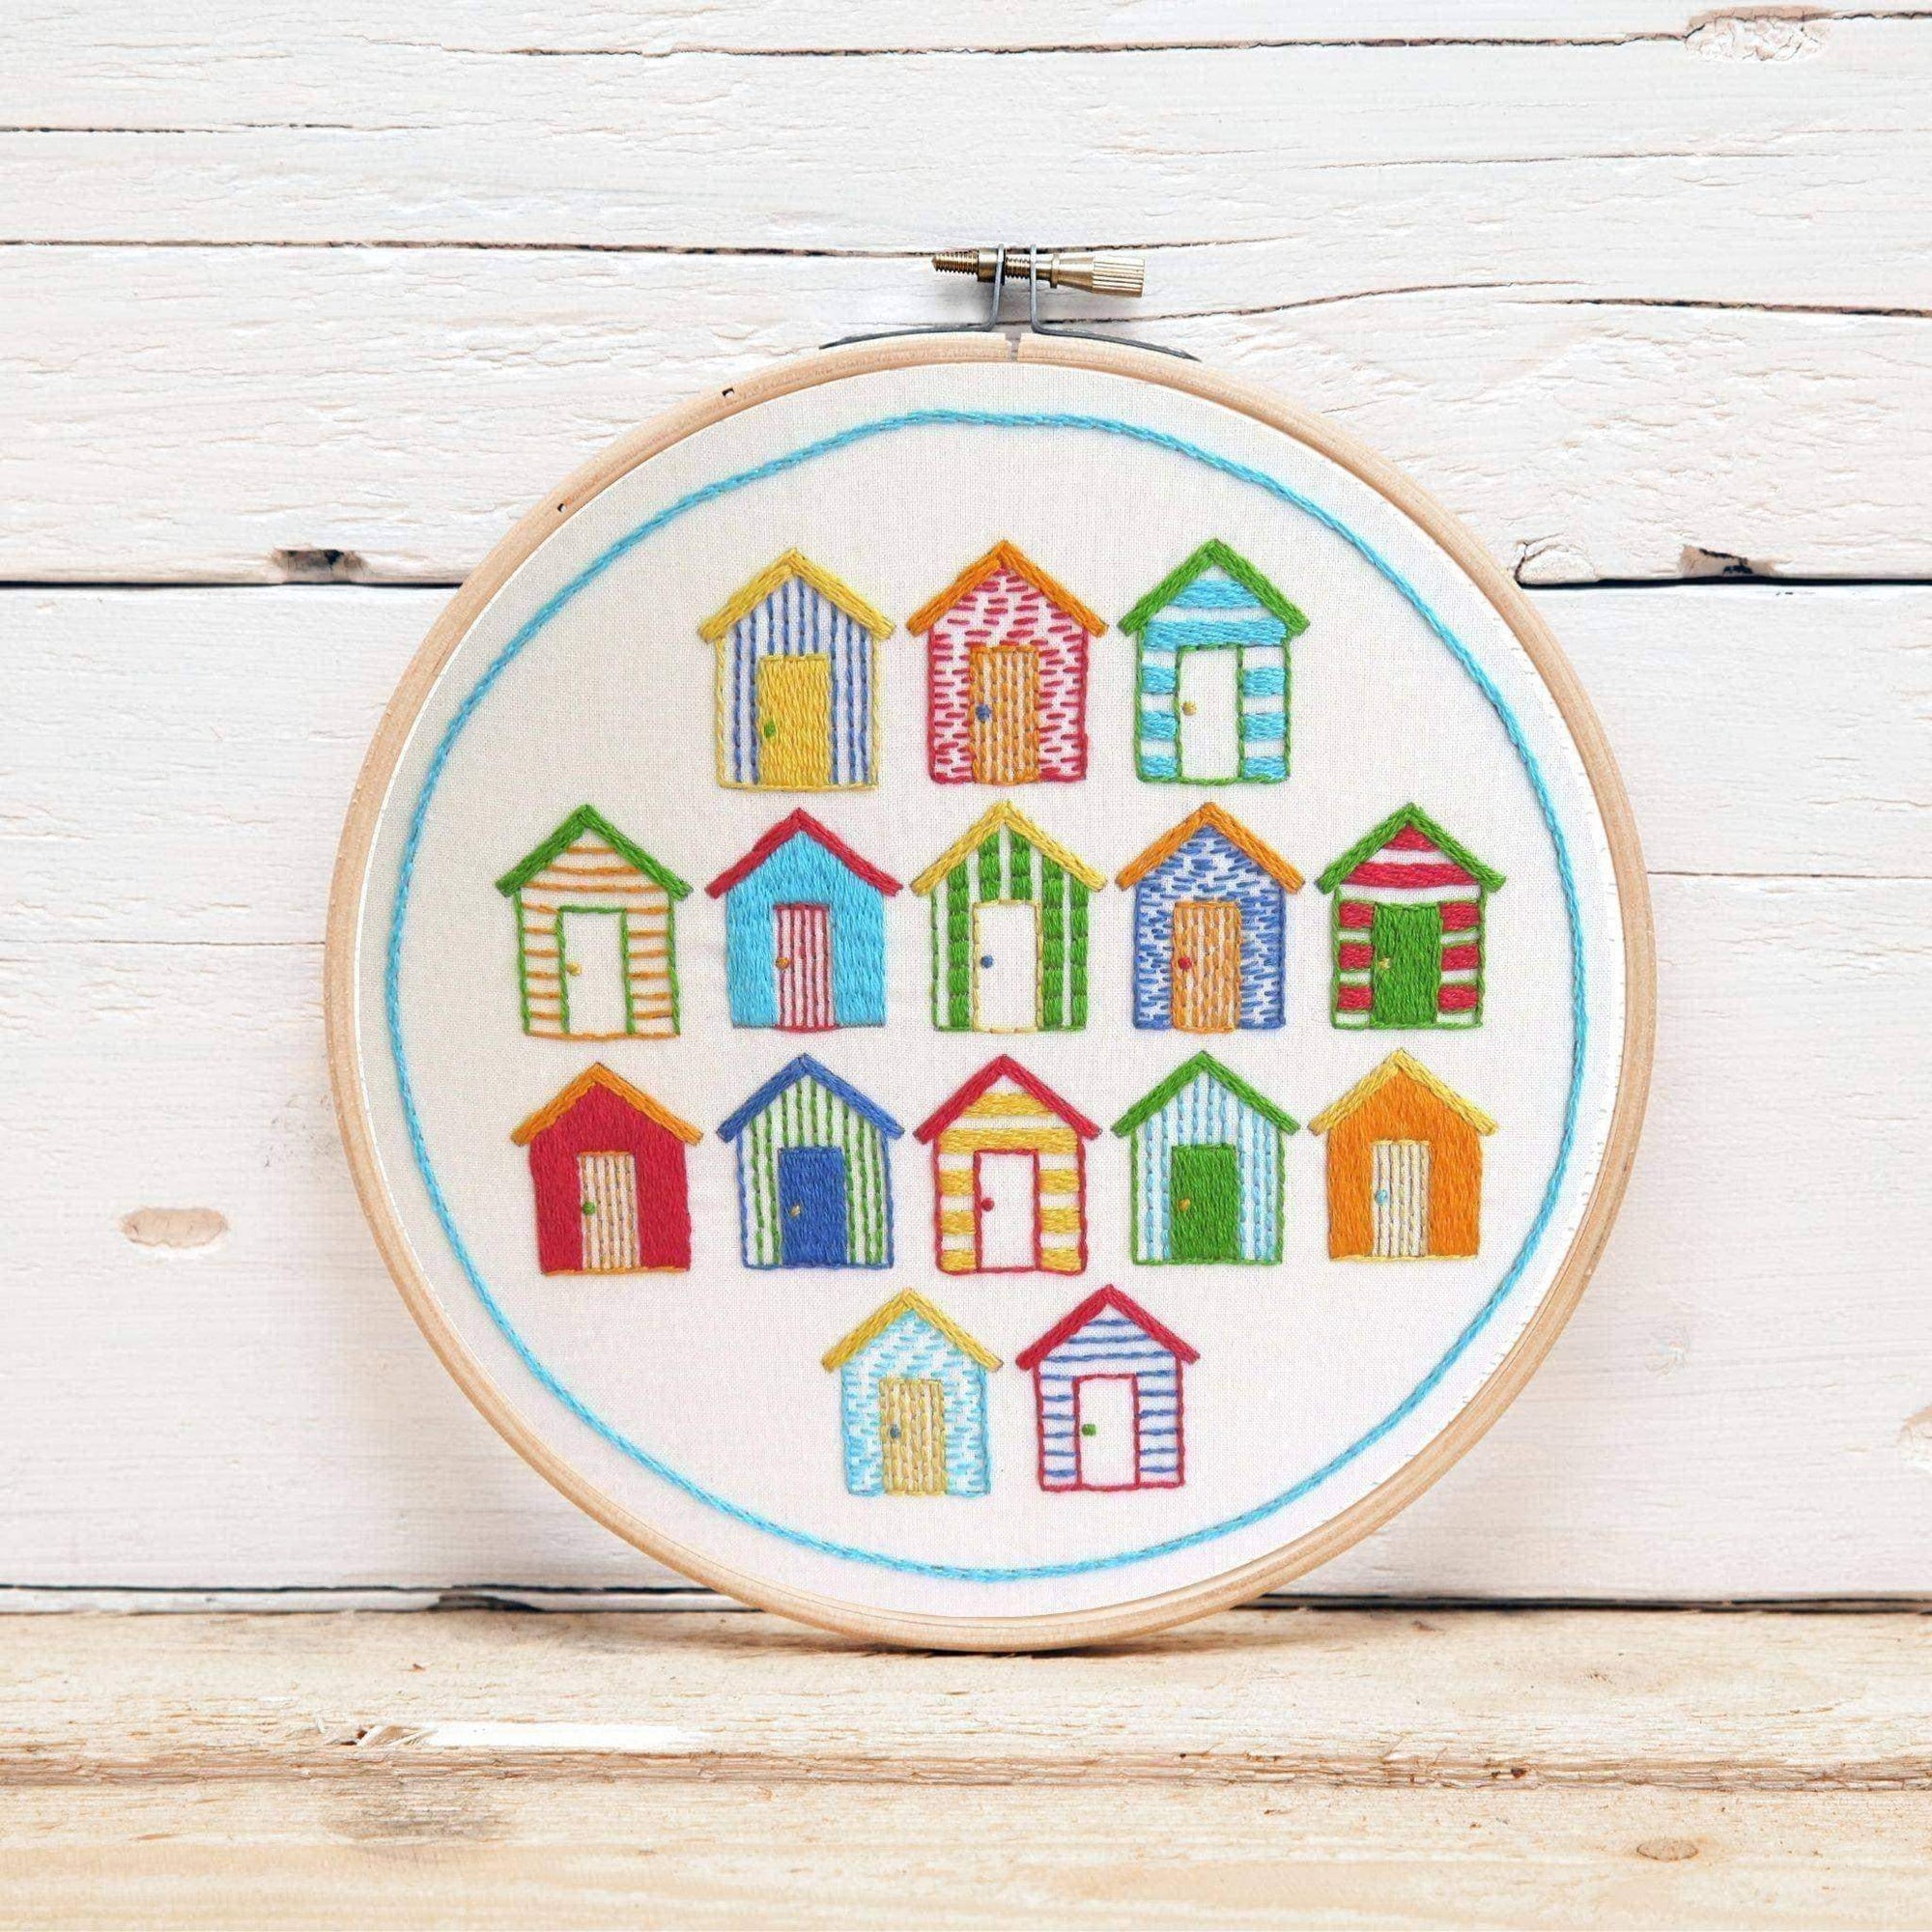 Beach Huts, Pre Printed Embroidery Fabric Pattern , Pre Printed Fabric Pattern , StitchDoodles , Embroidery, embroidery hoop, embroidery hoop kit, Embroidery Kit, embroidery kit for adults, embroidery kit fro beginners, embroidery pattern, hand embroidery, hand embroidery fabric, hand embroidery kit, hand embroidery seat frame, modern embroidery kits, nurge embroidery hoop, PDF pattern, Printed Pattern , StitchDoodles , shop.stitchdoodles.com